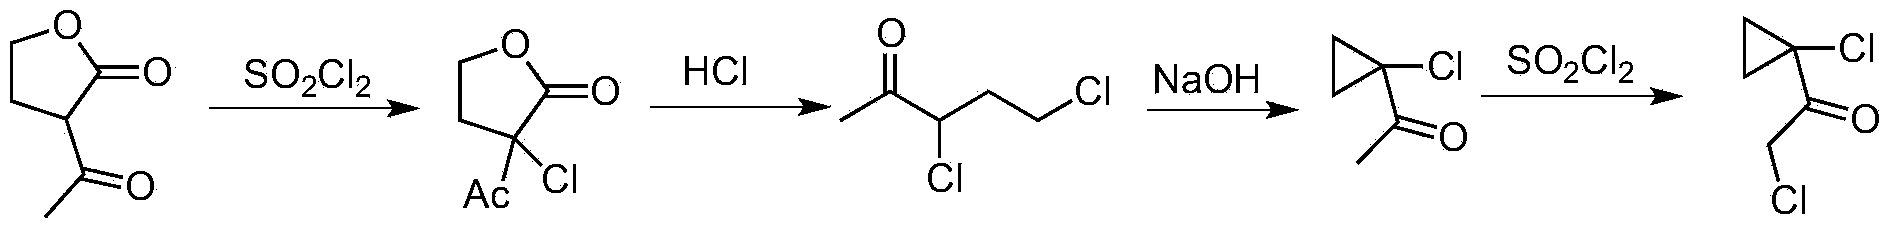 Synthetic process of 1-chloro-cyclopropanecarbonyl chloride